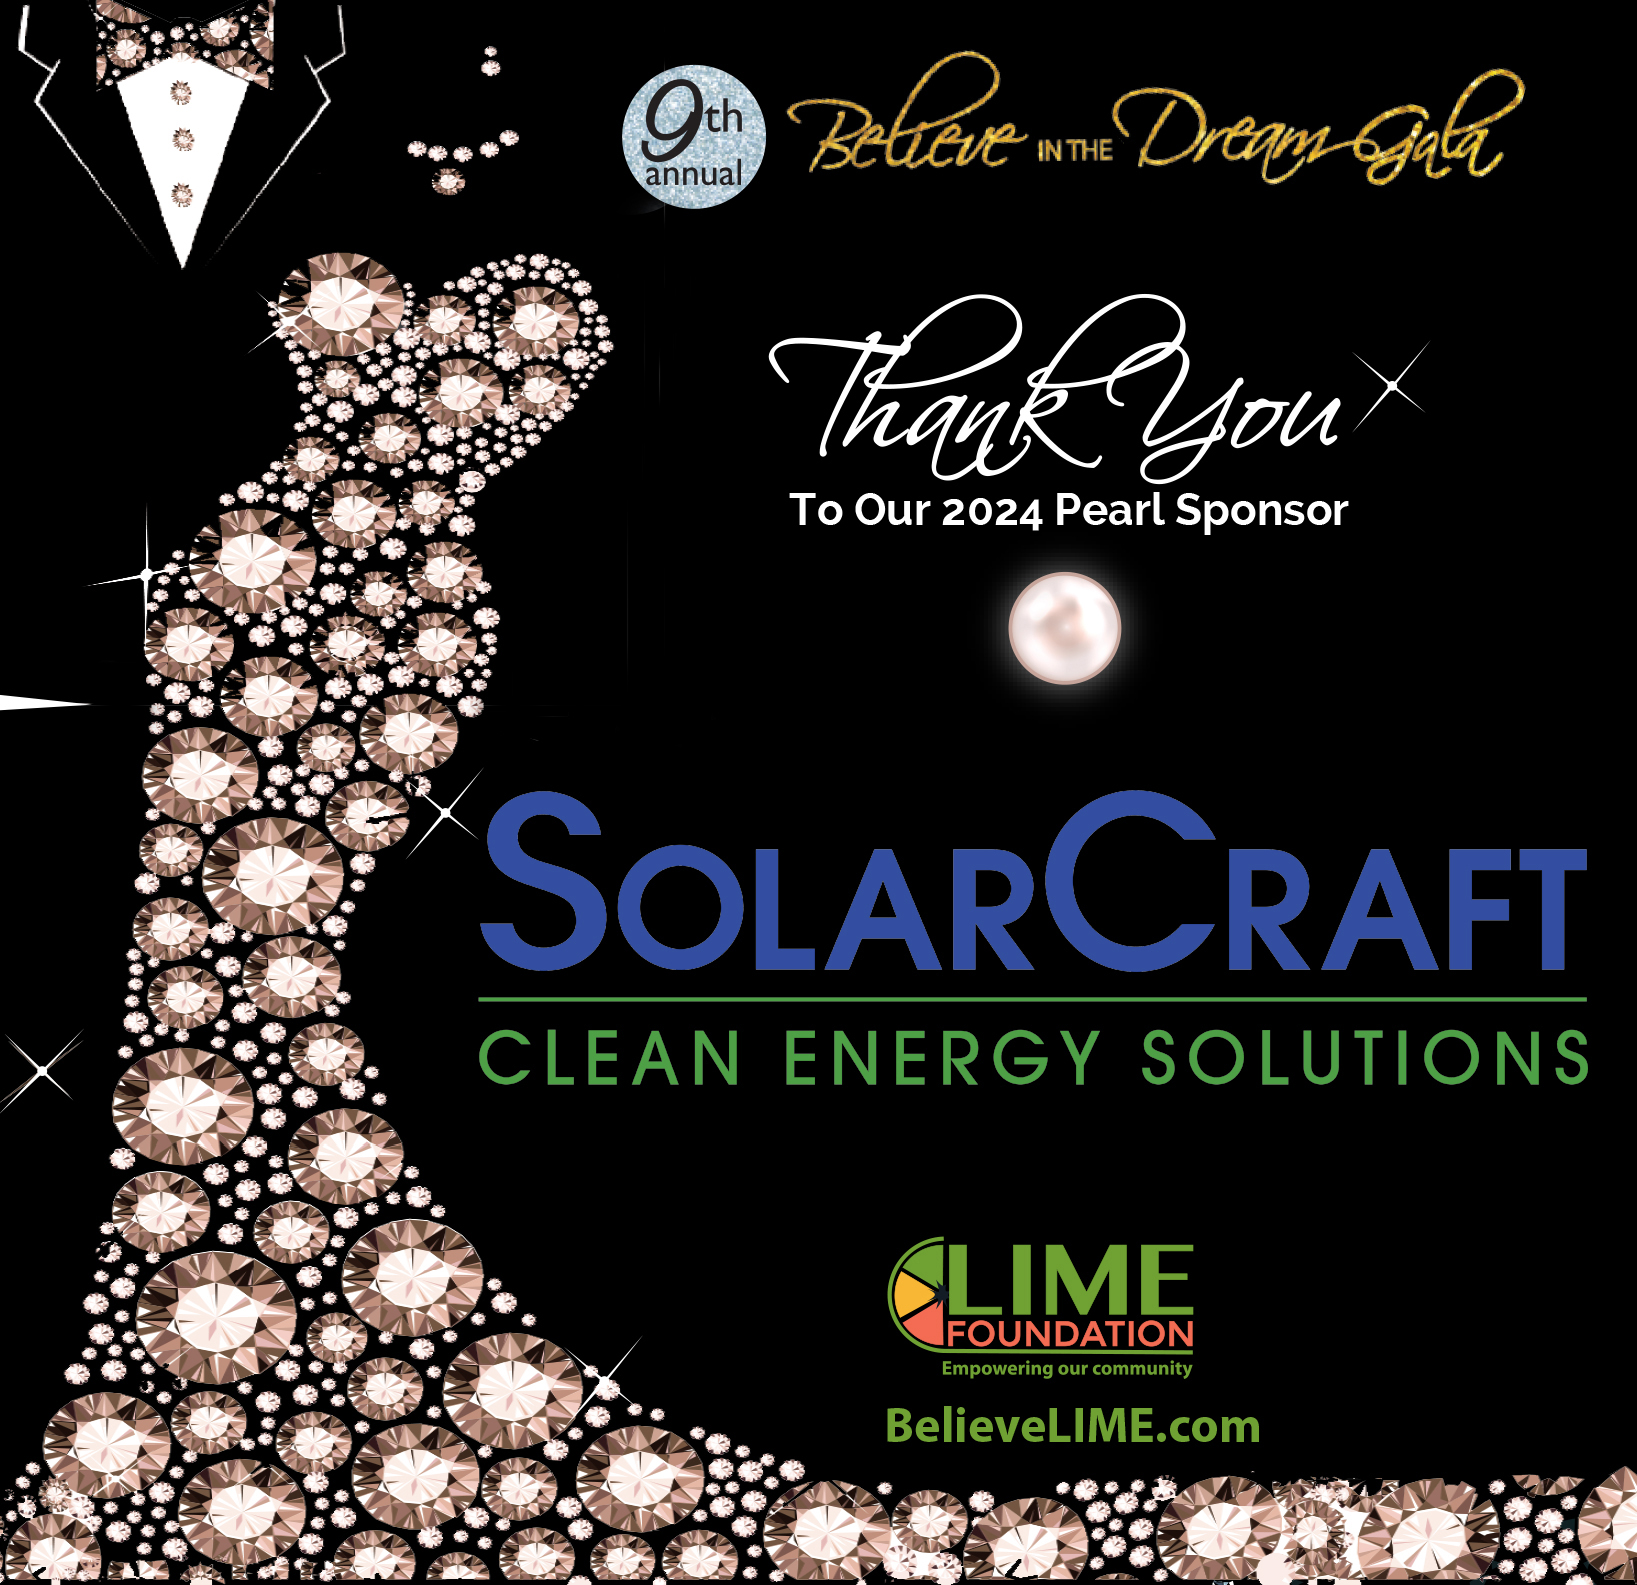 Elegant graphic featuring a sparkling dress silhouette with "Believe The Dream 2024 gala" text, thanking pearl sponsor Solarcraft and Lime Foundation logos.